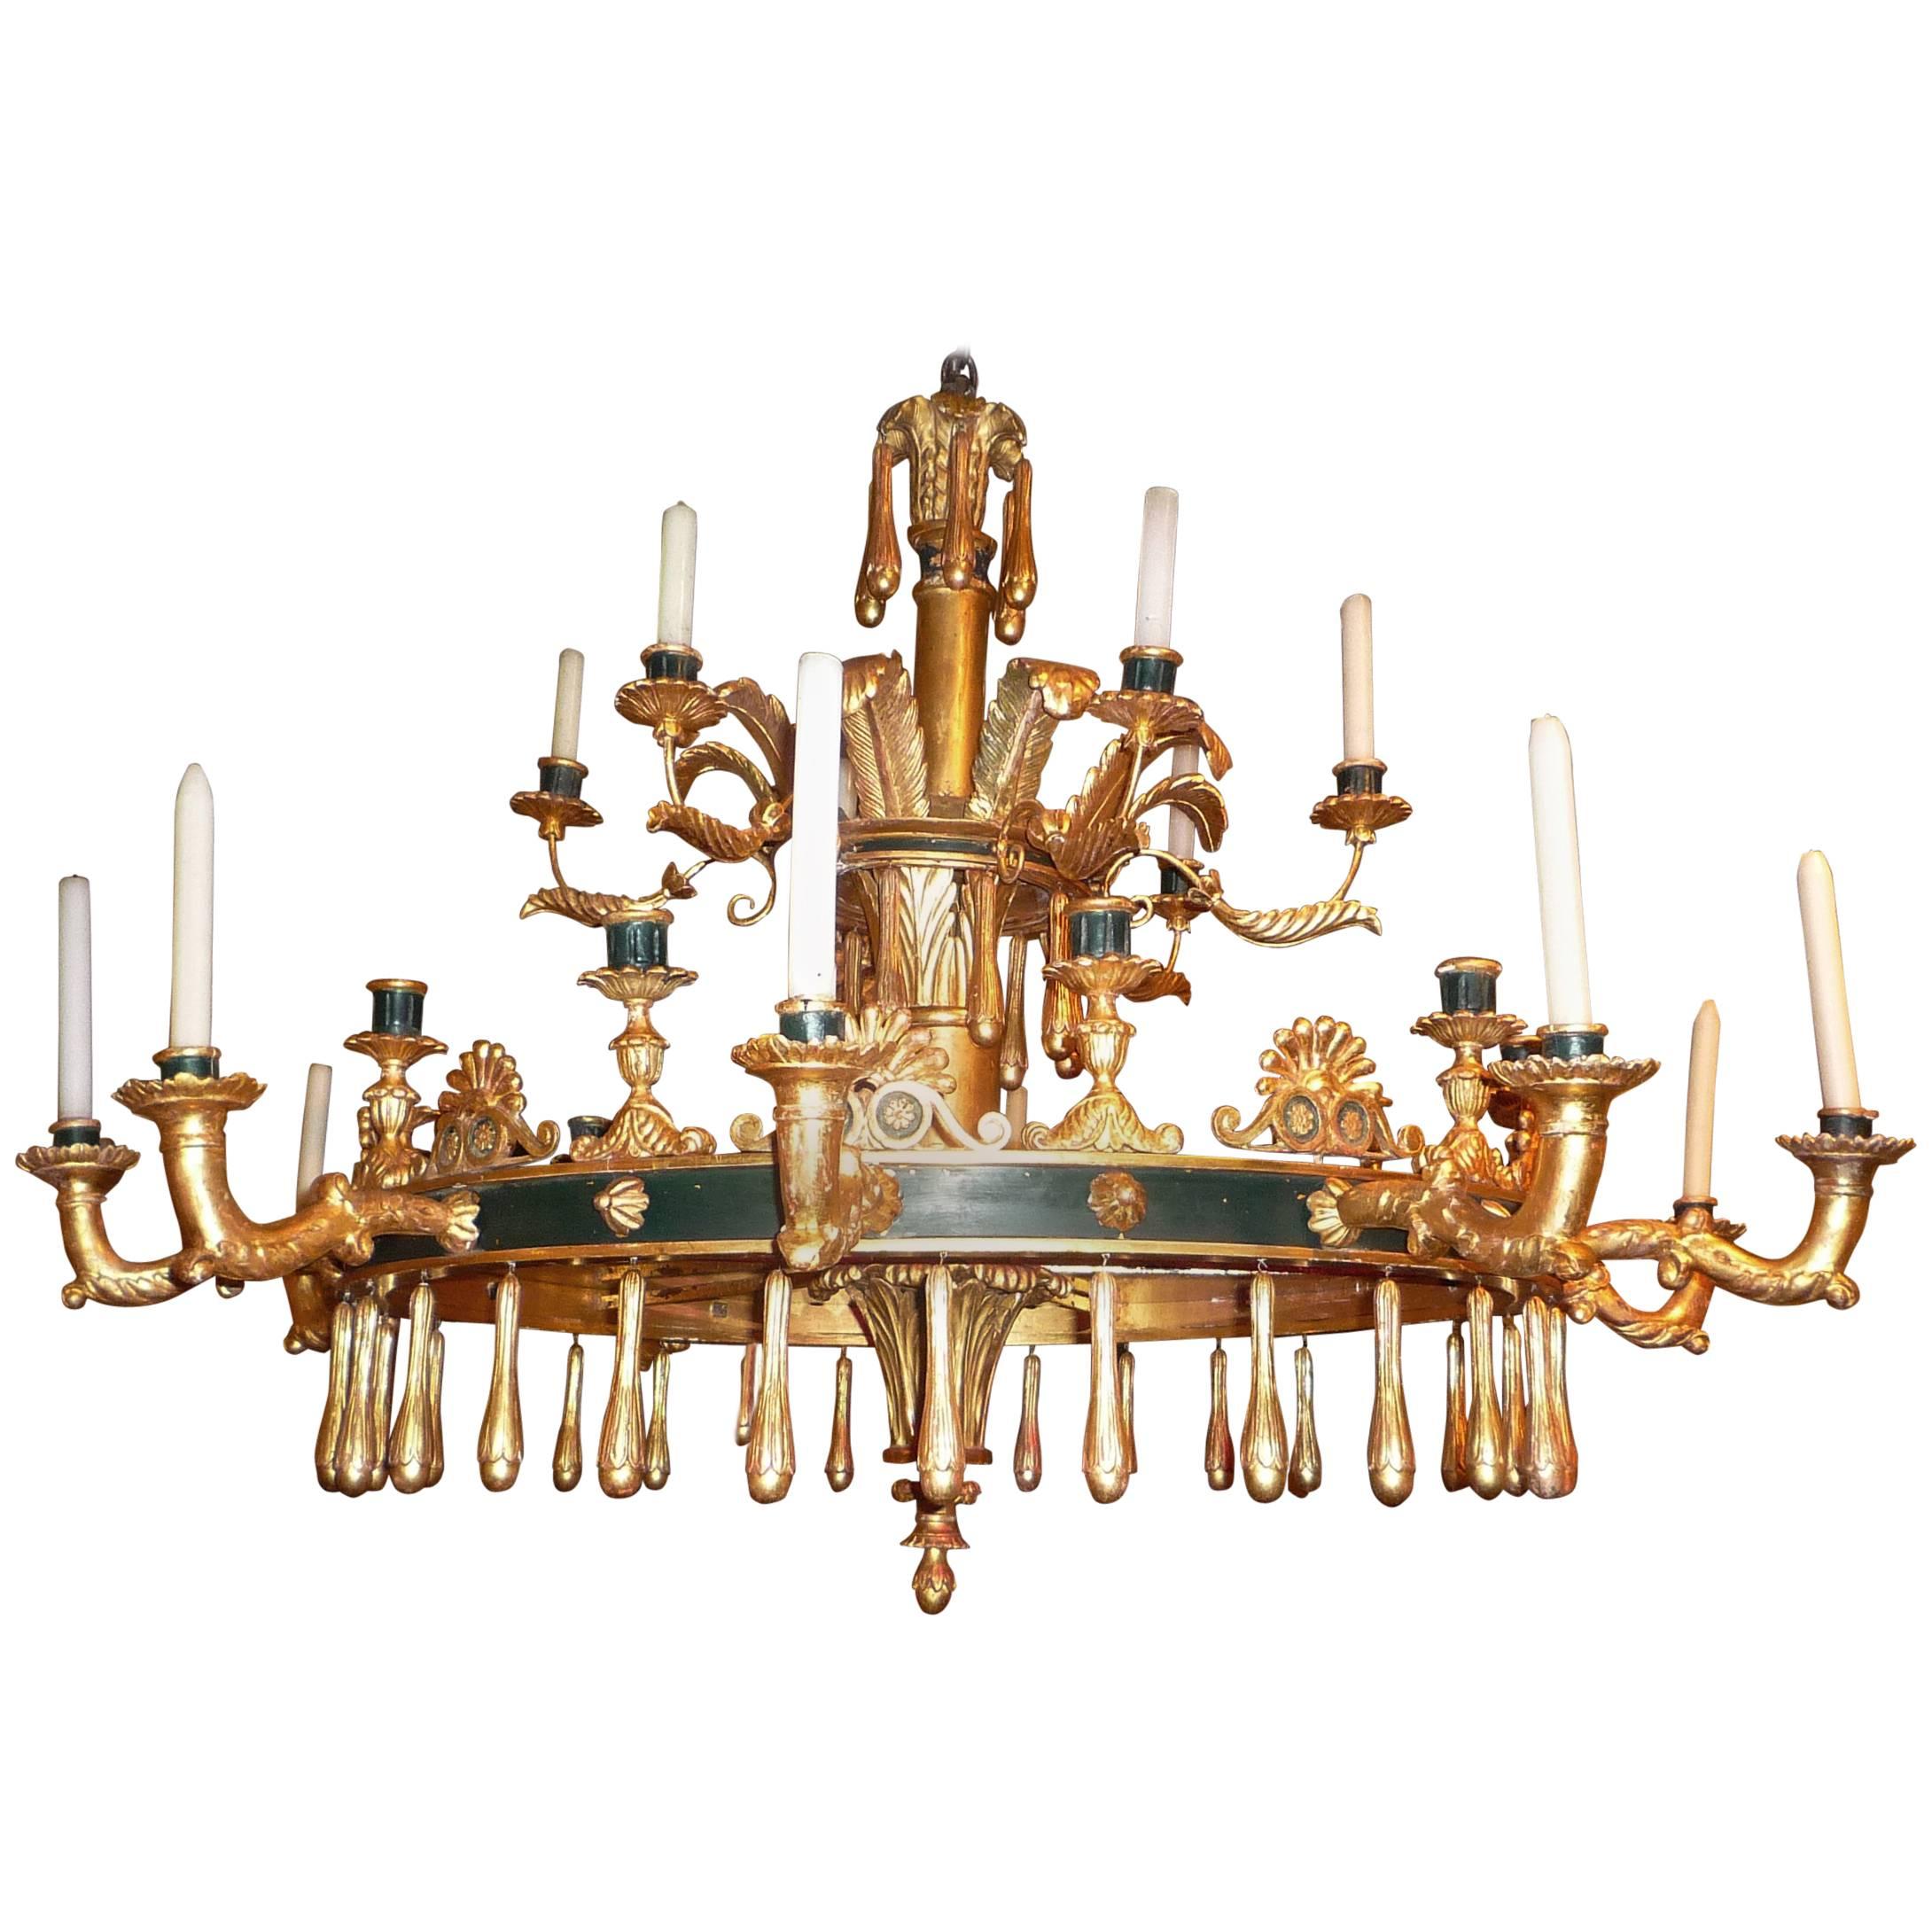 Neapolitan Neoclassical Gilt and Painted Wood Chandelier, Italy, circa 1815